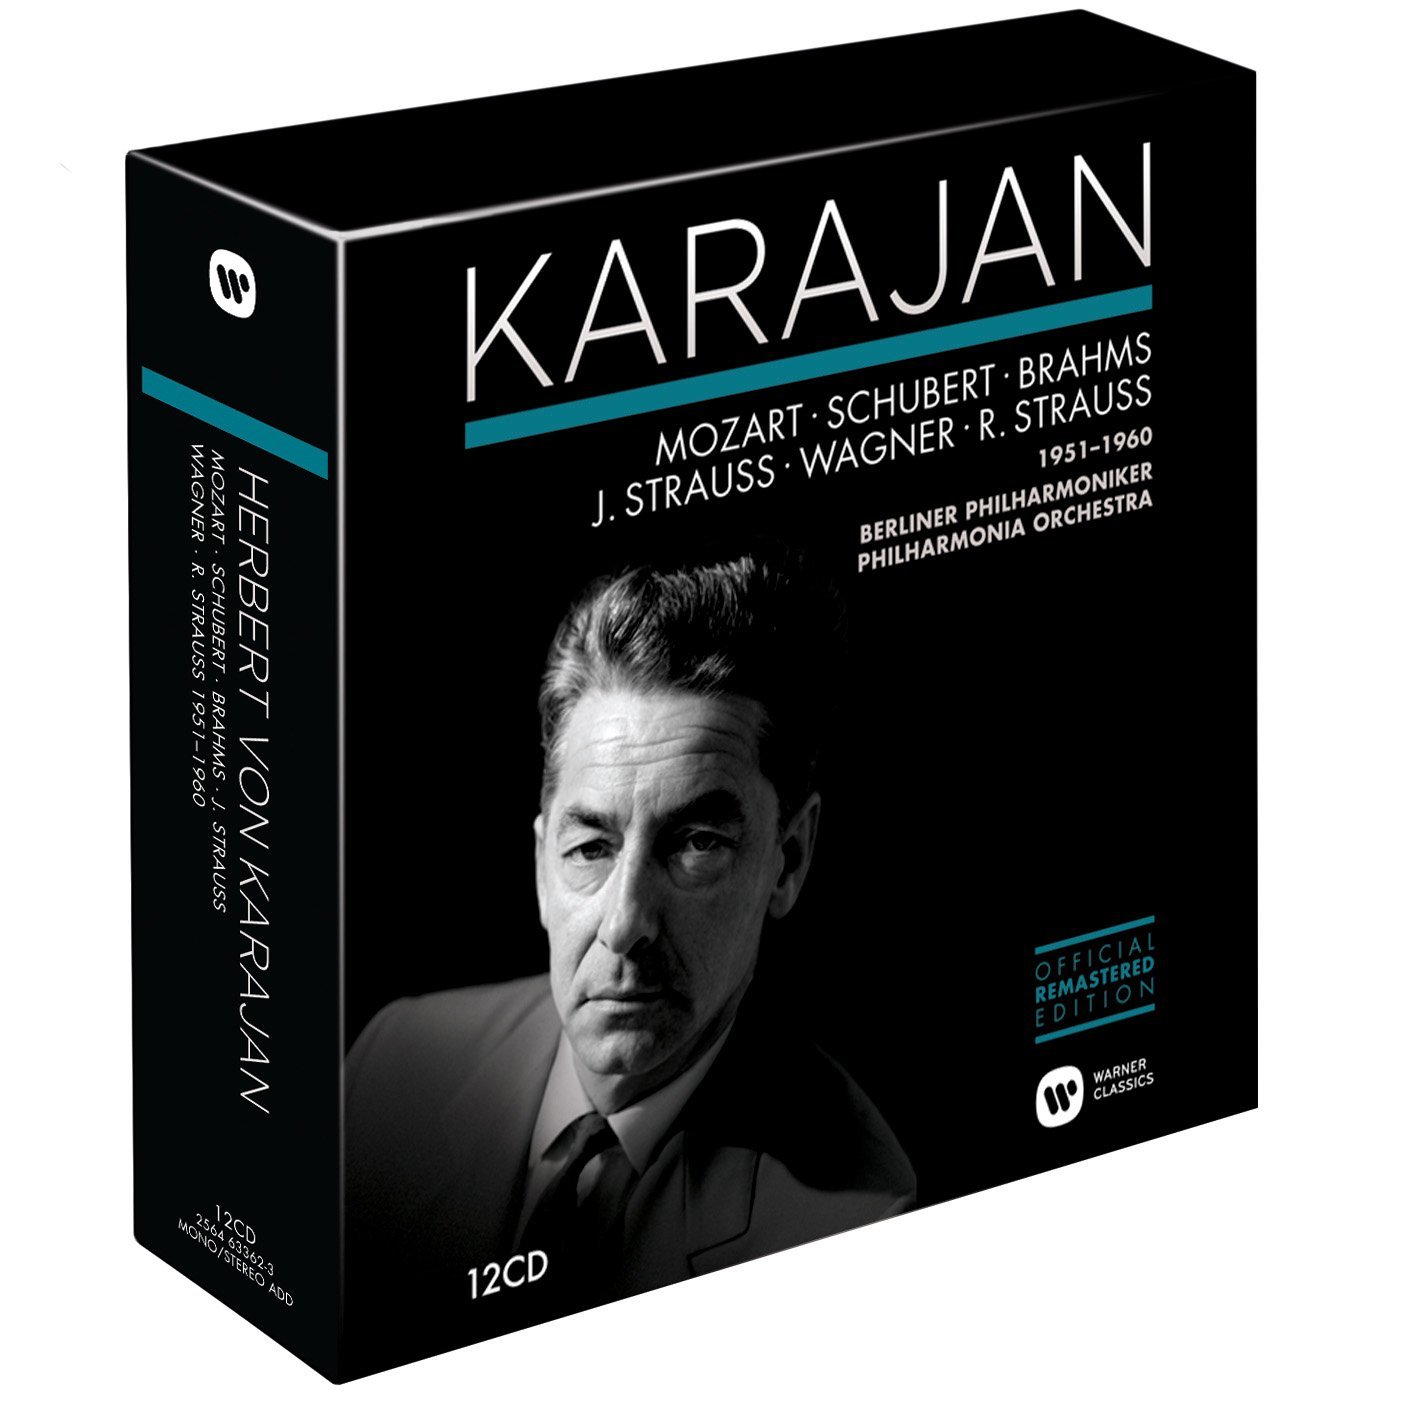 Karajan 25th Anniversary Perspectives part 2- Music of Mozart, Brahms, Strauss, Strauss and Wagner